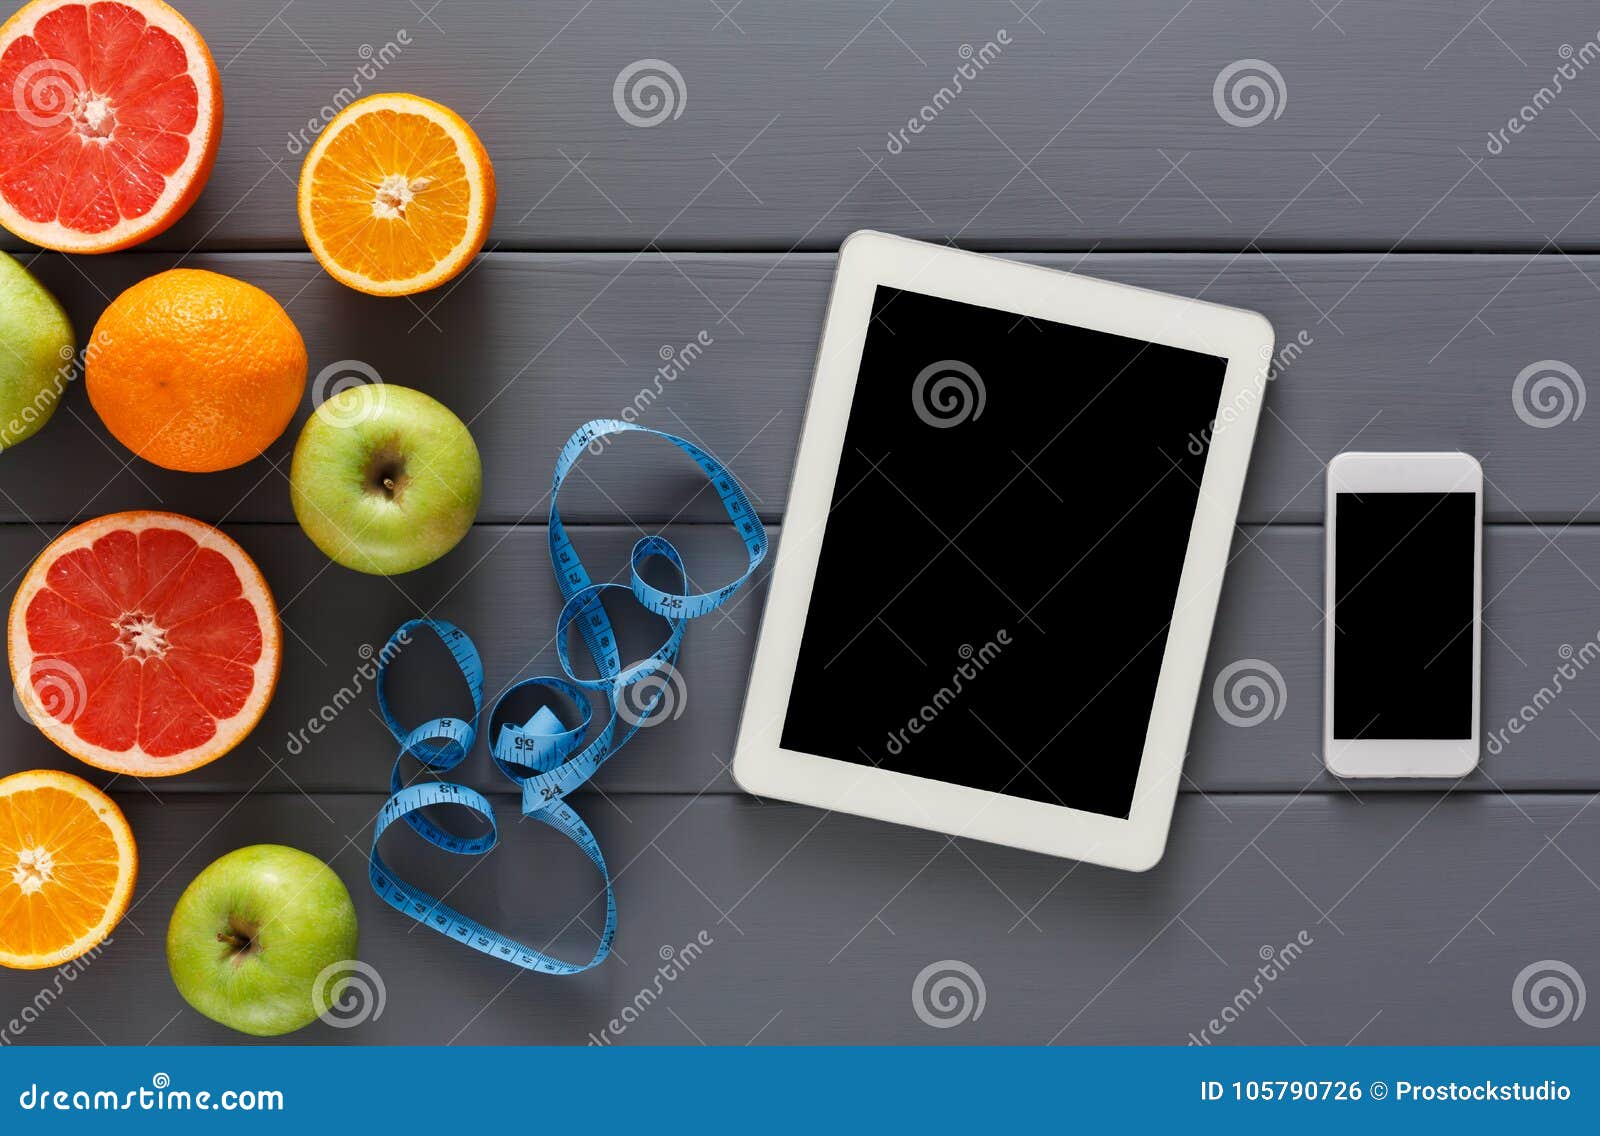 Download Fruit, Measuring Tape And Blank Tablet Mockup Stock Photo - Image of healthy, modern: 105790726